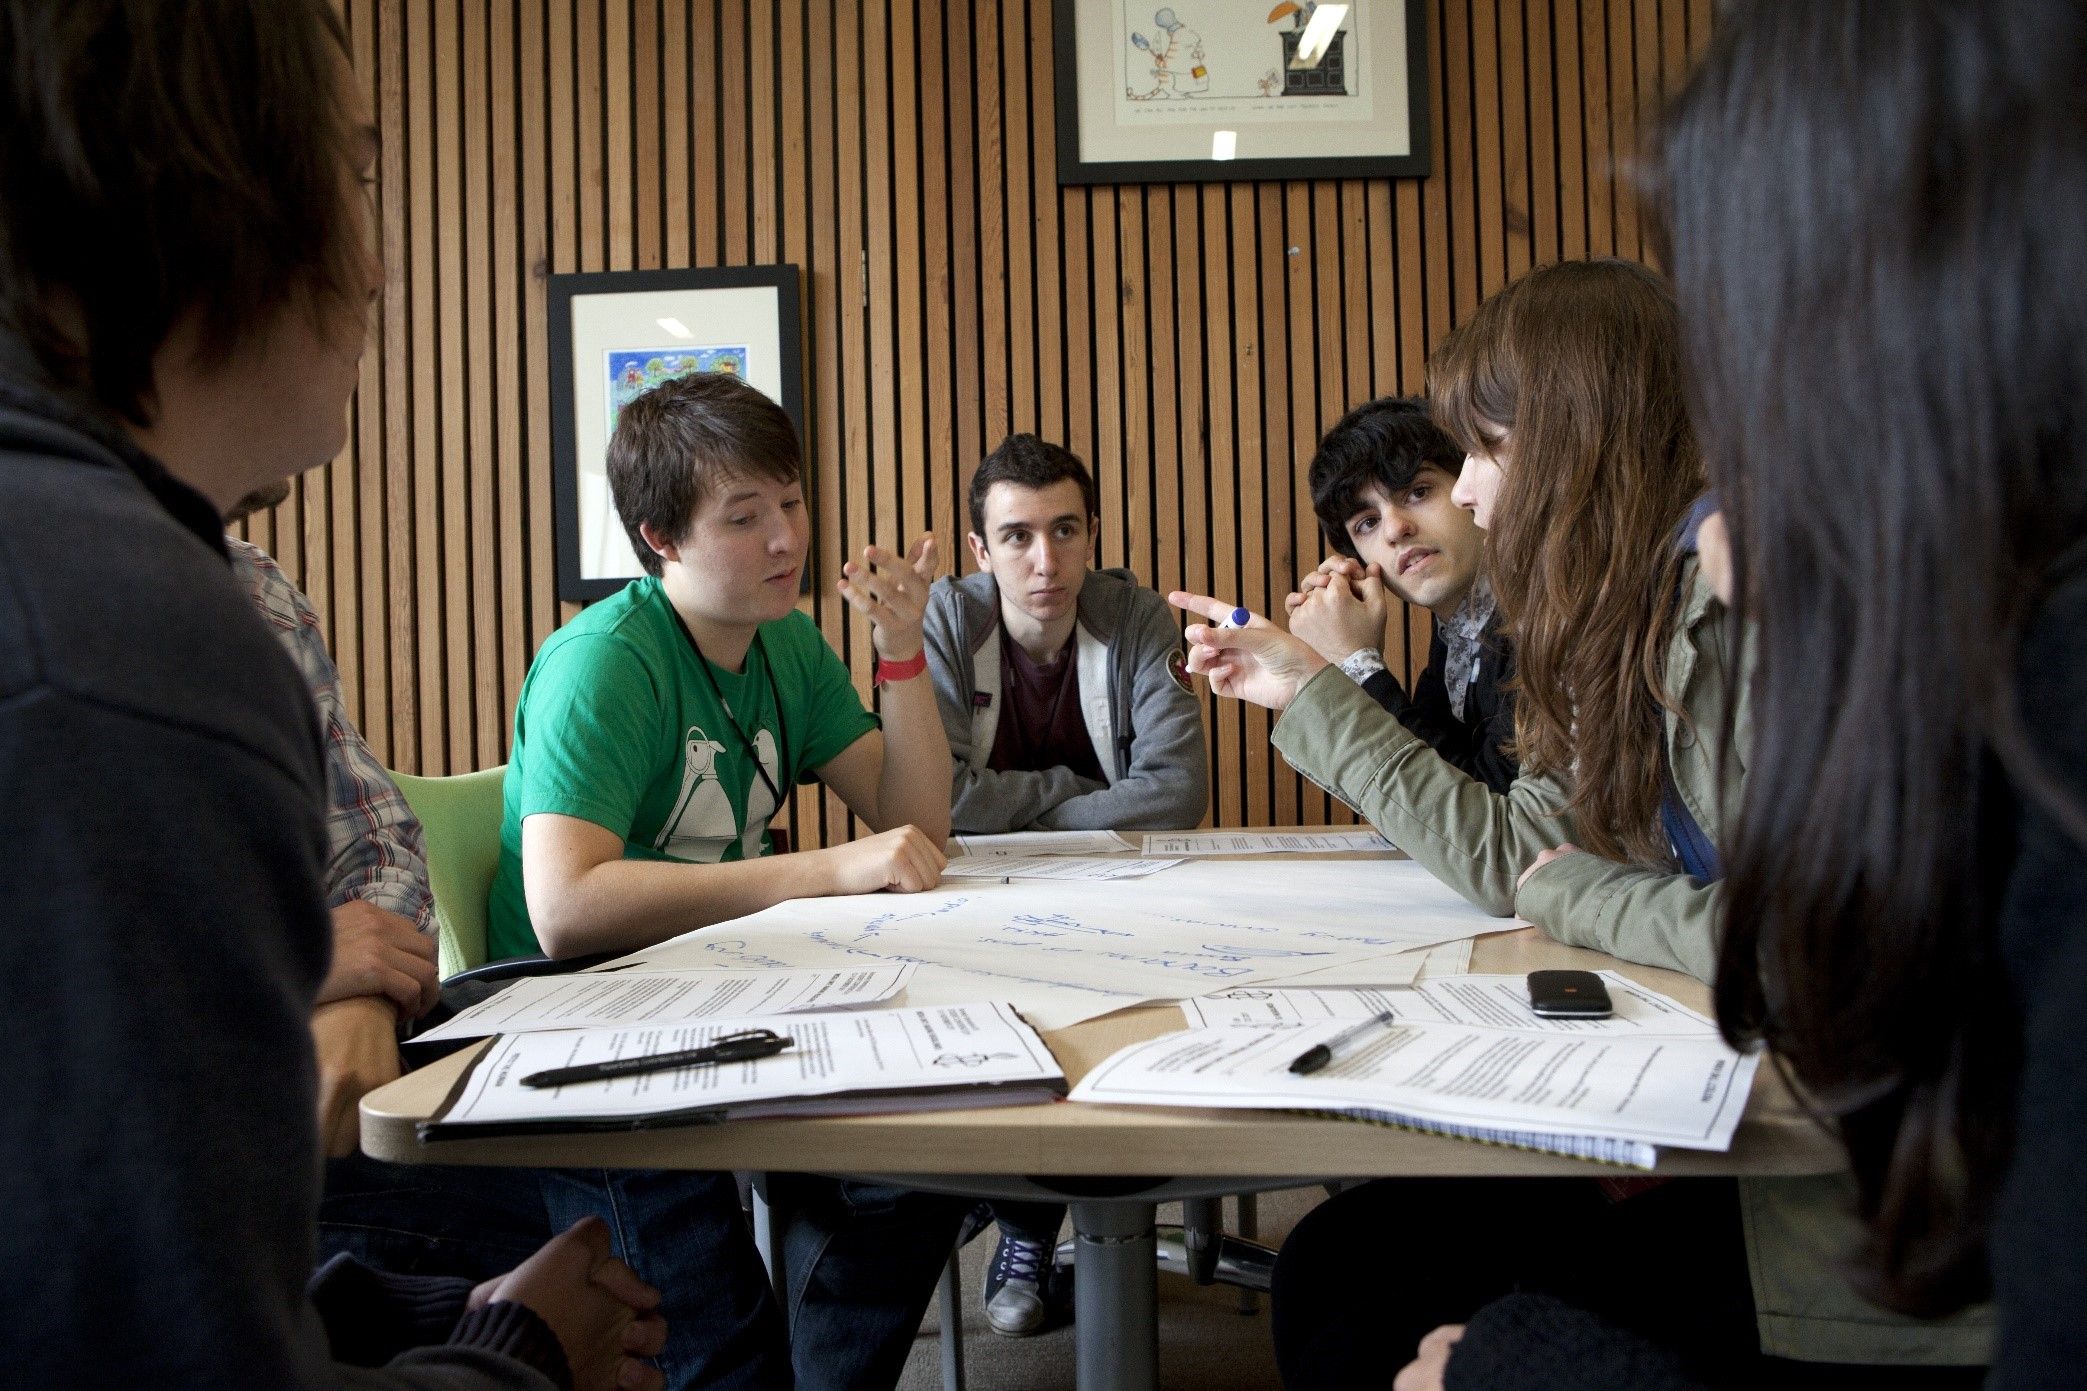 A group of young people around a table discussing ideas.